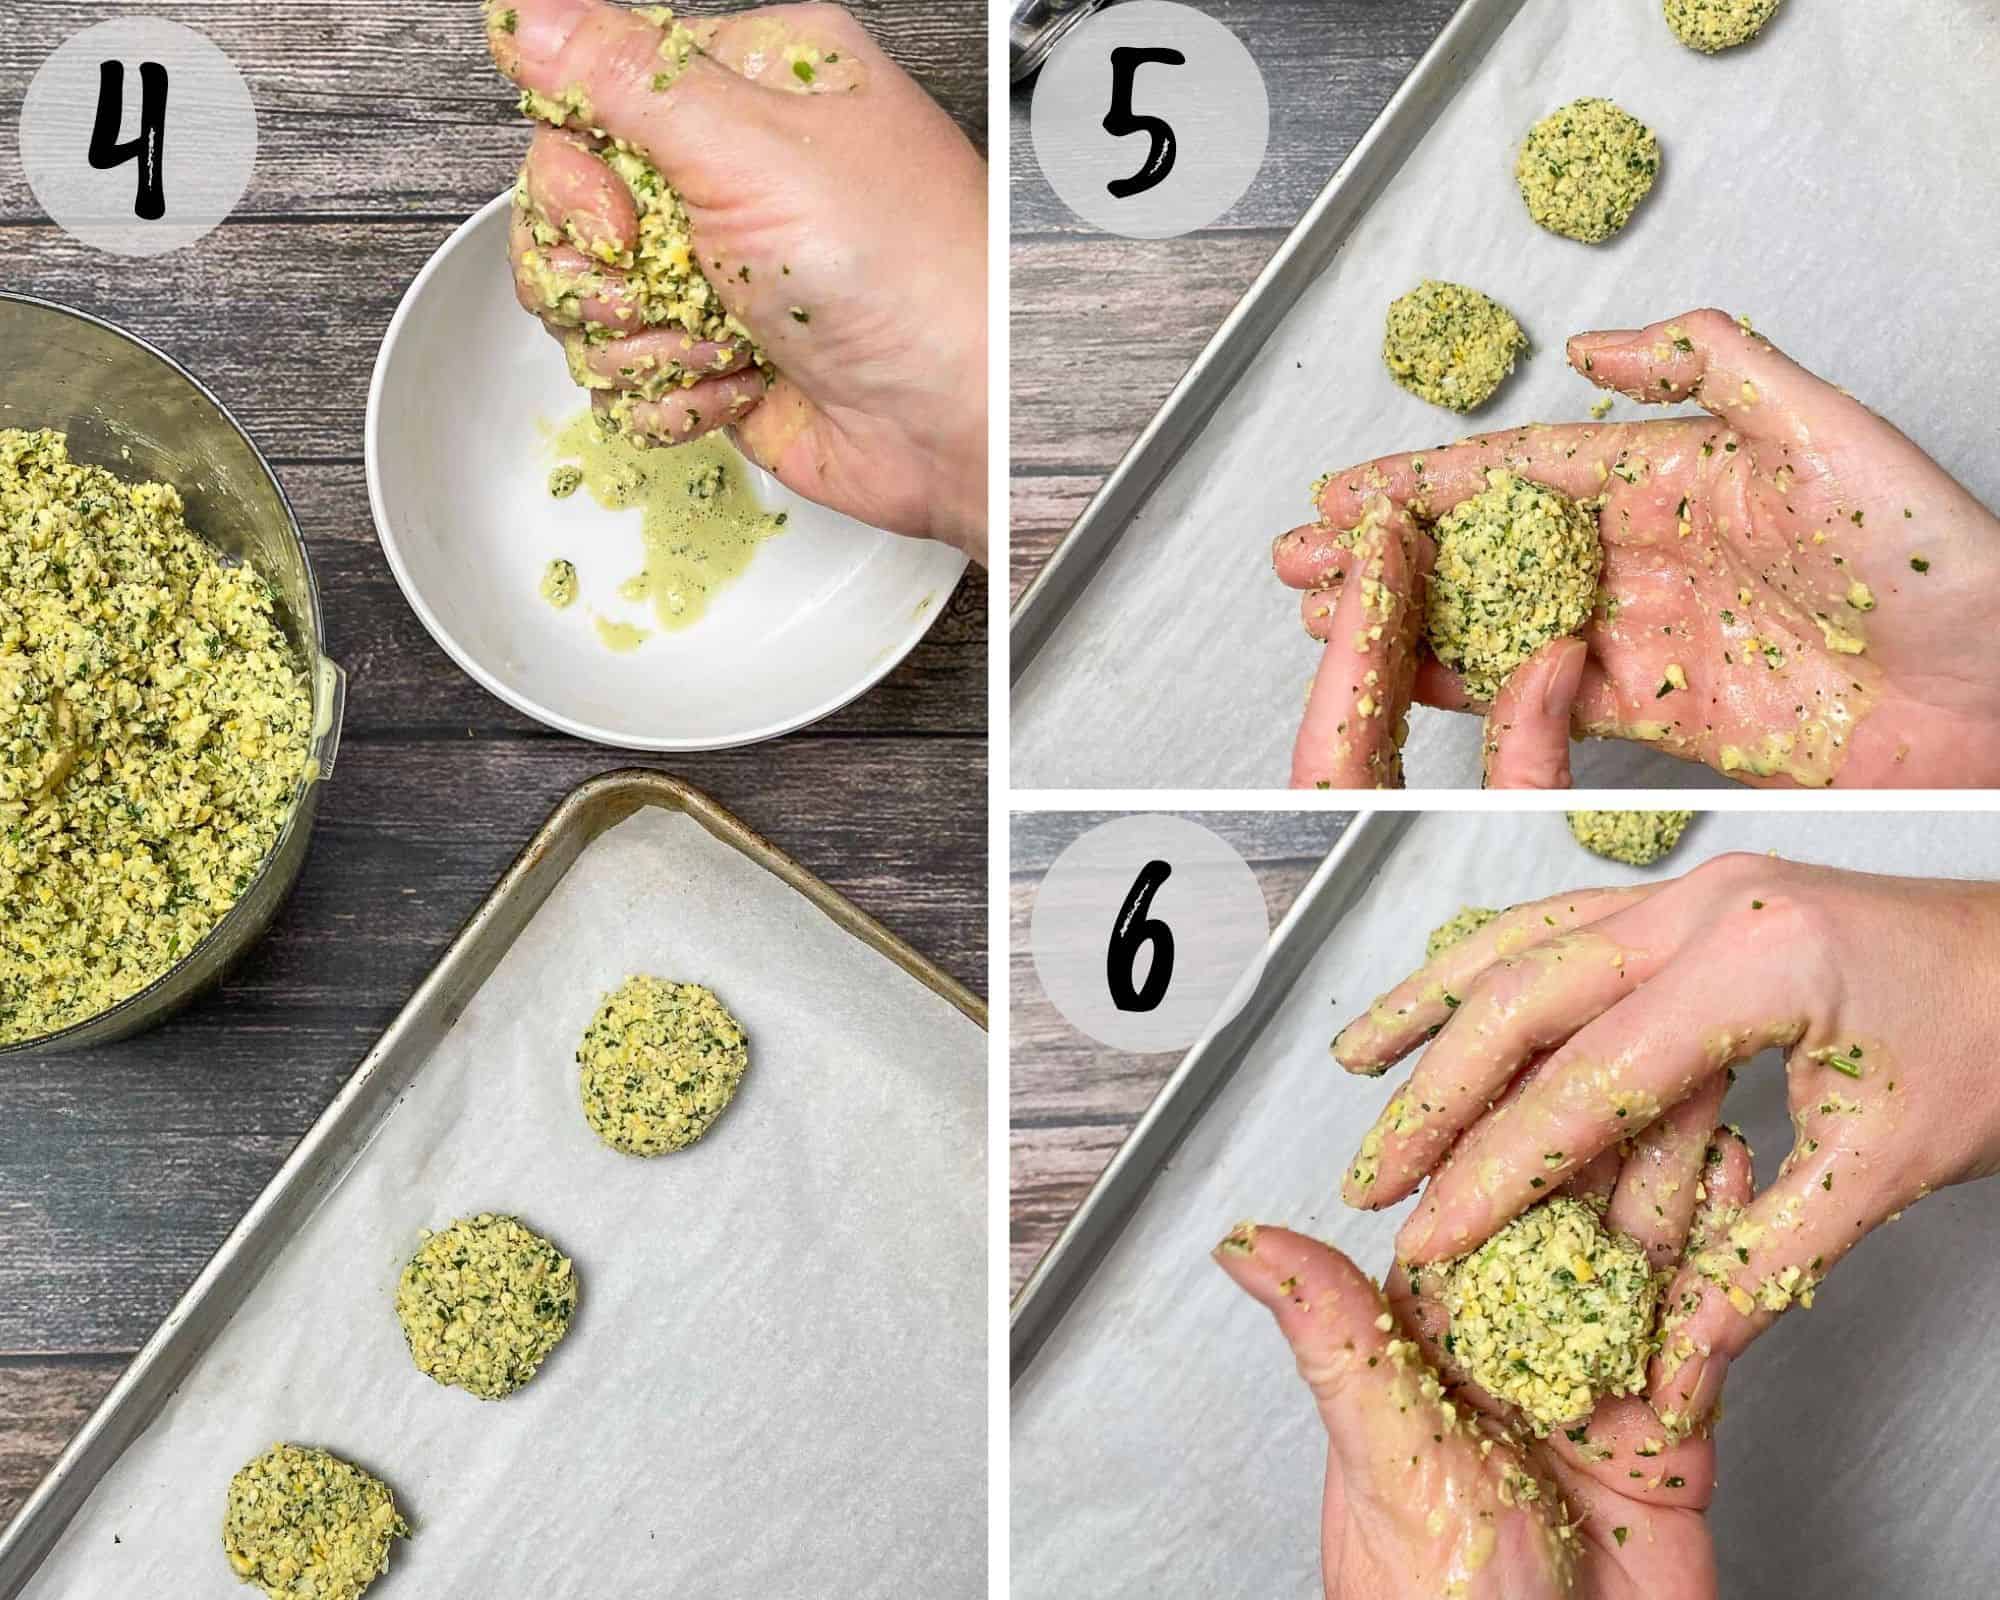 forming falafel into nugget shapes and placing them down on baking tray